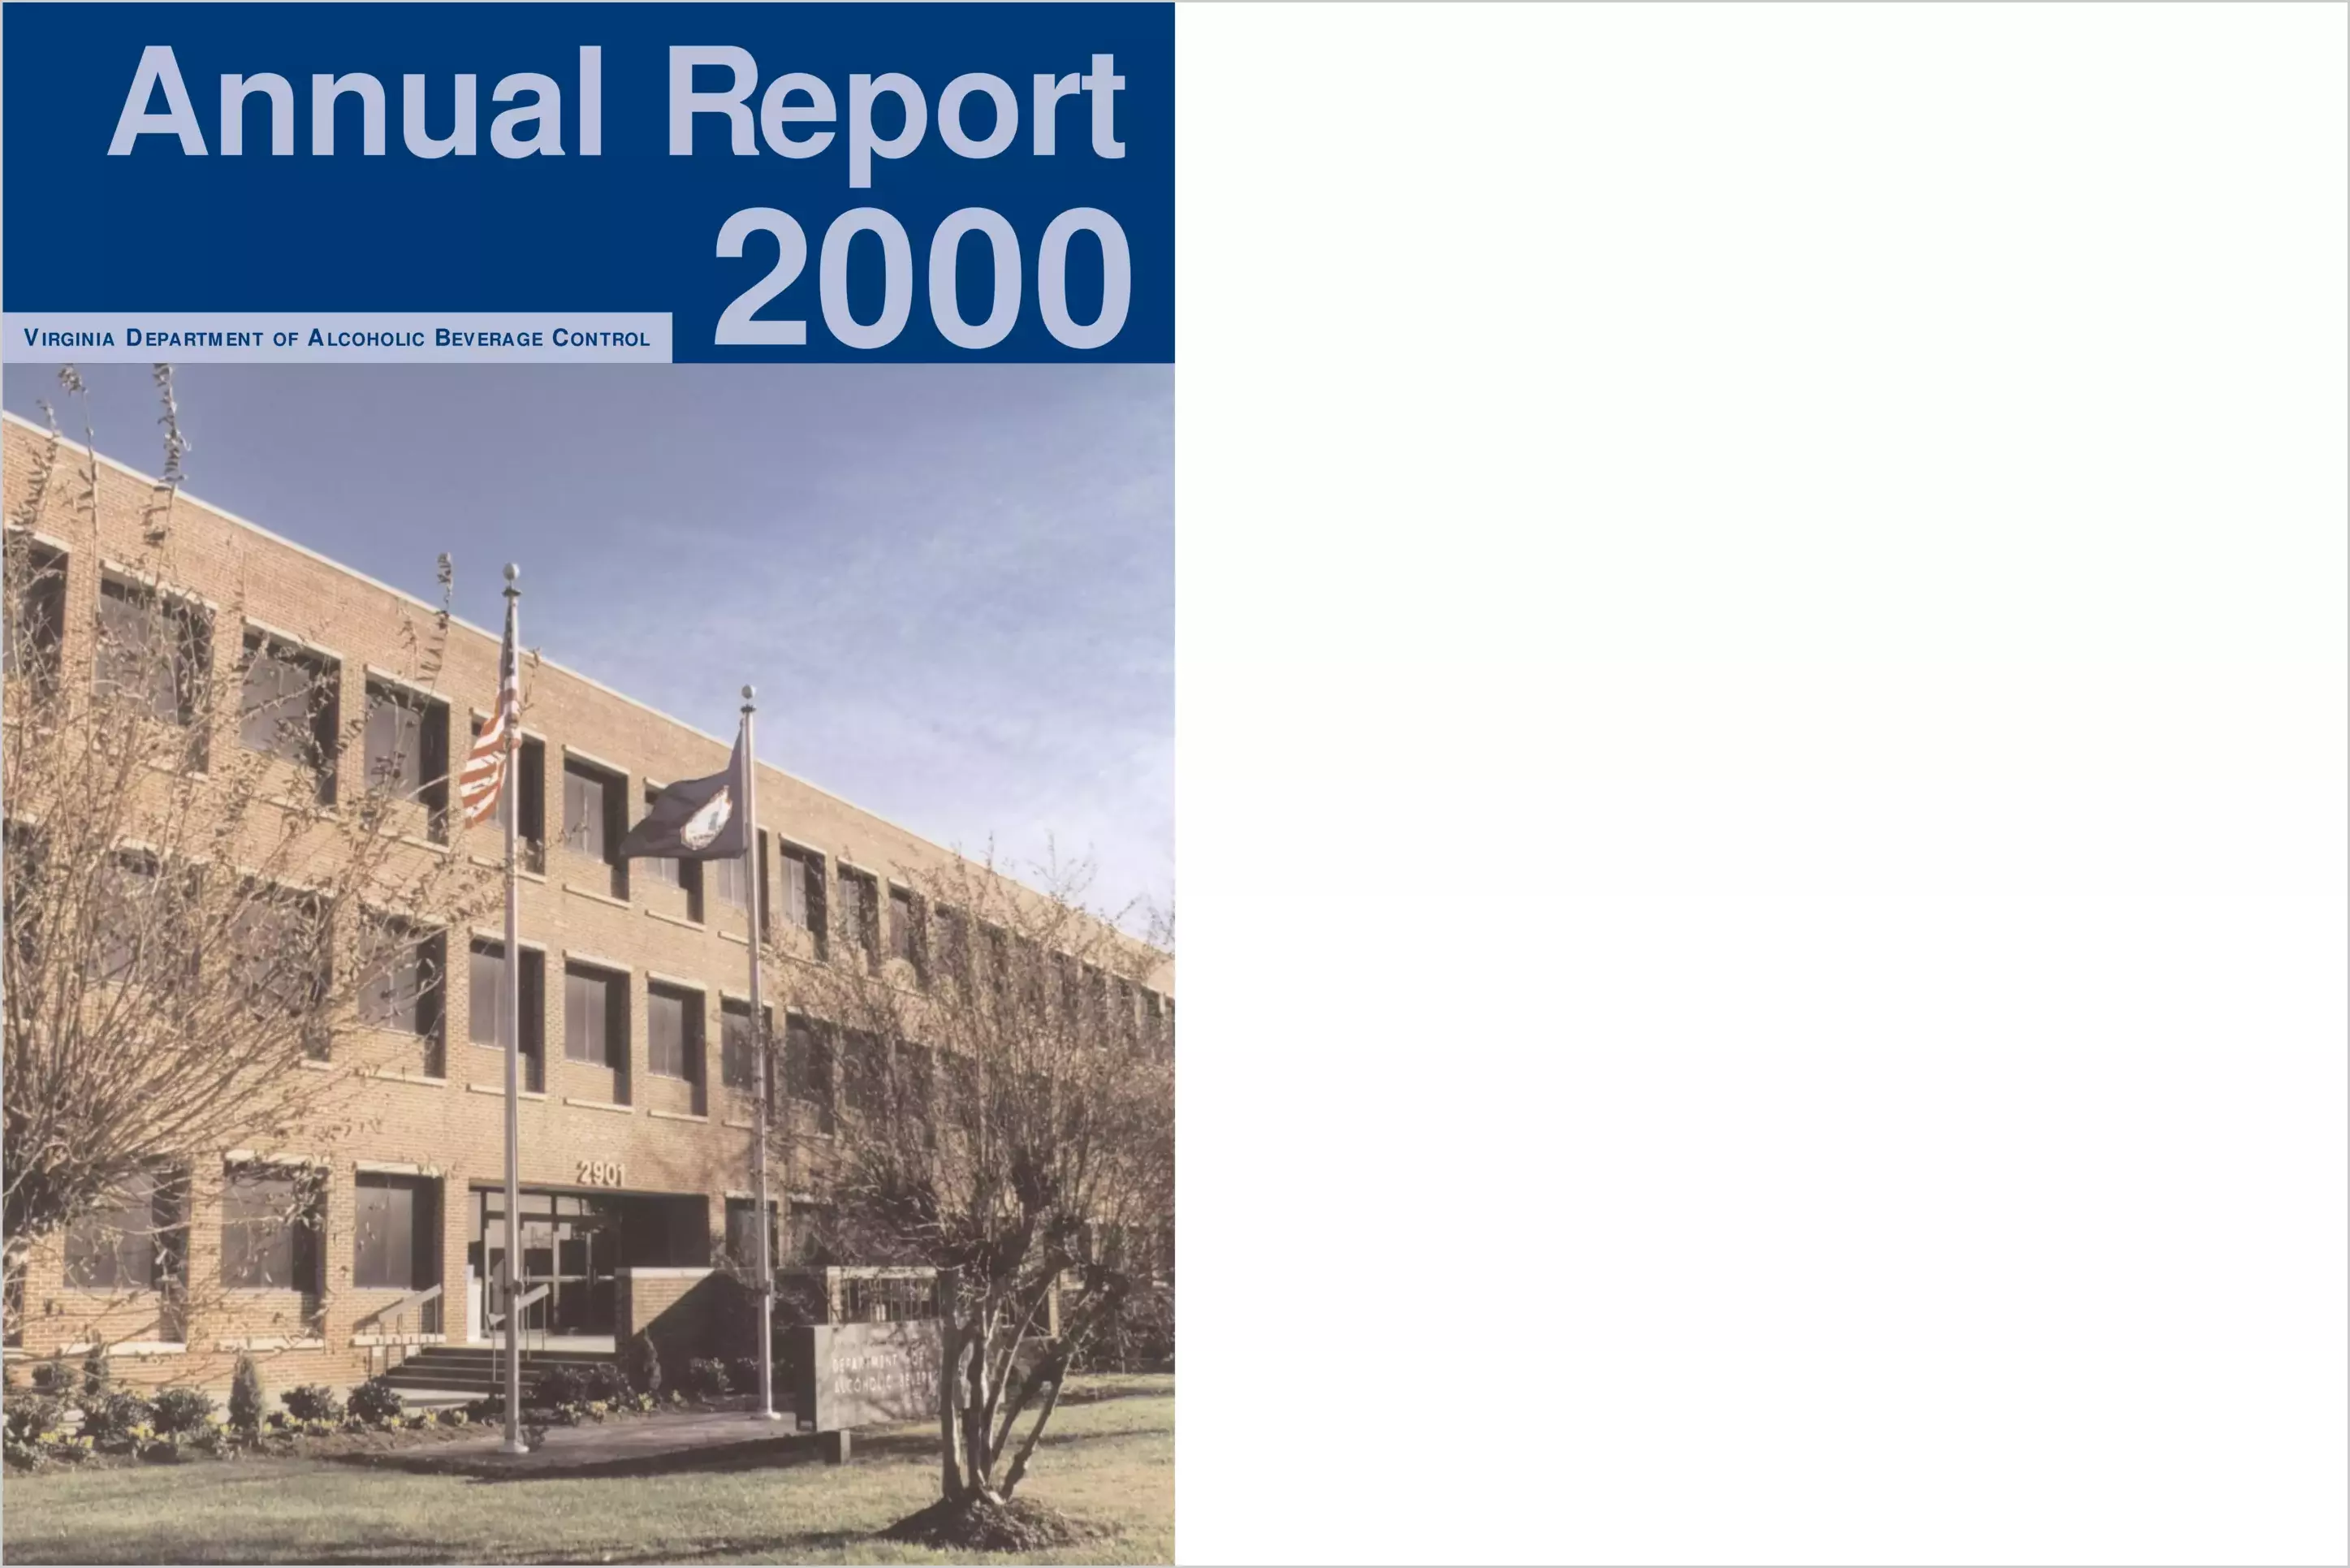 Department of Alcoholic Beverage Control Annual Report 2000